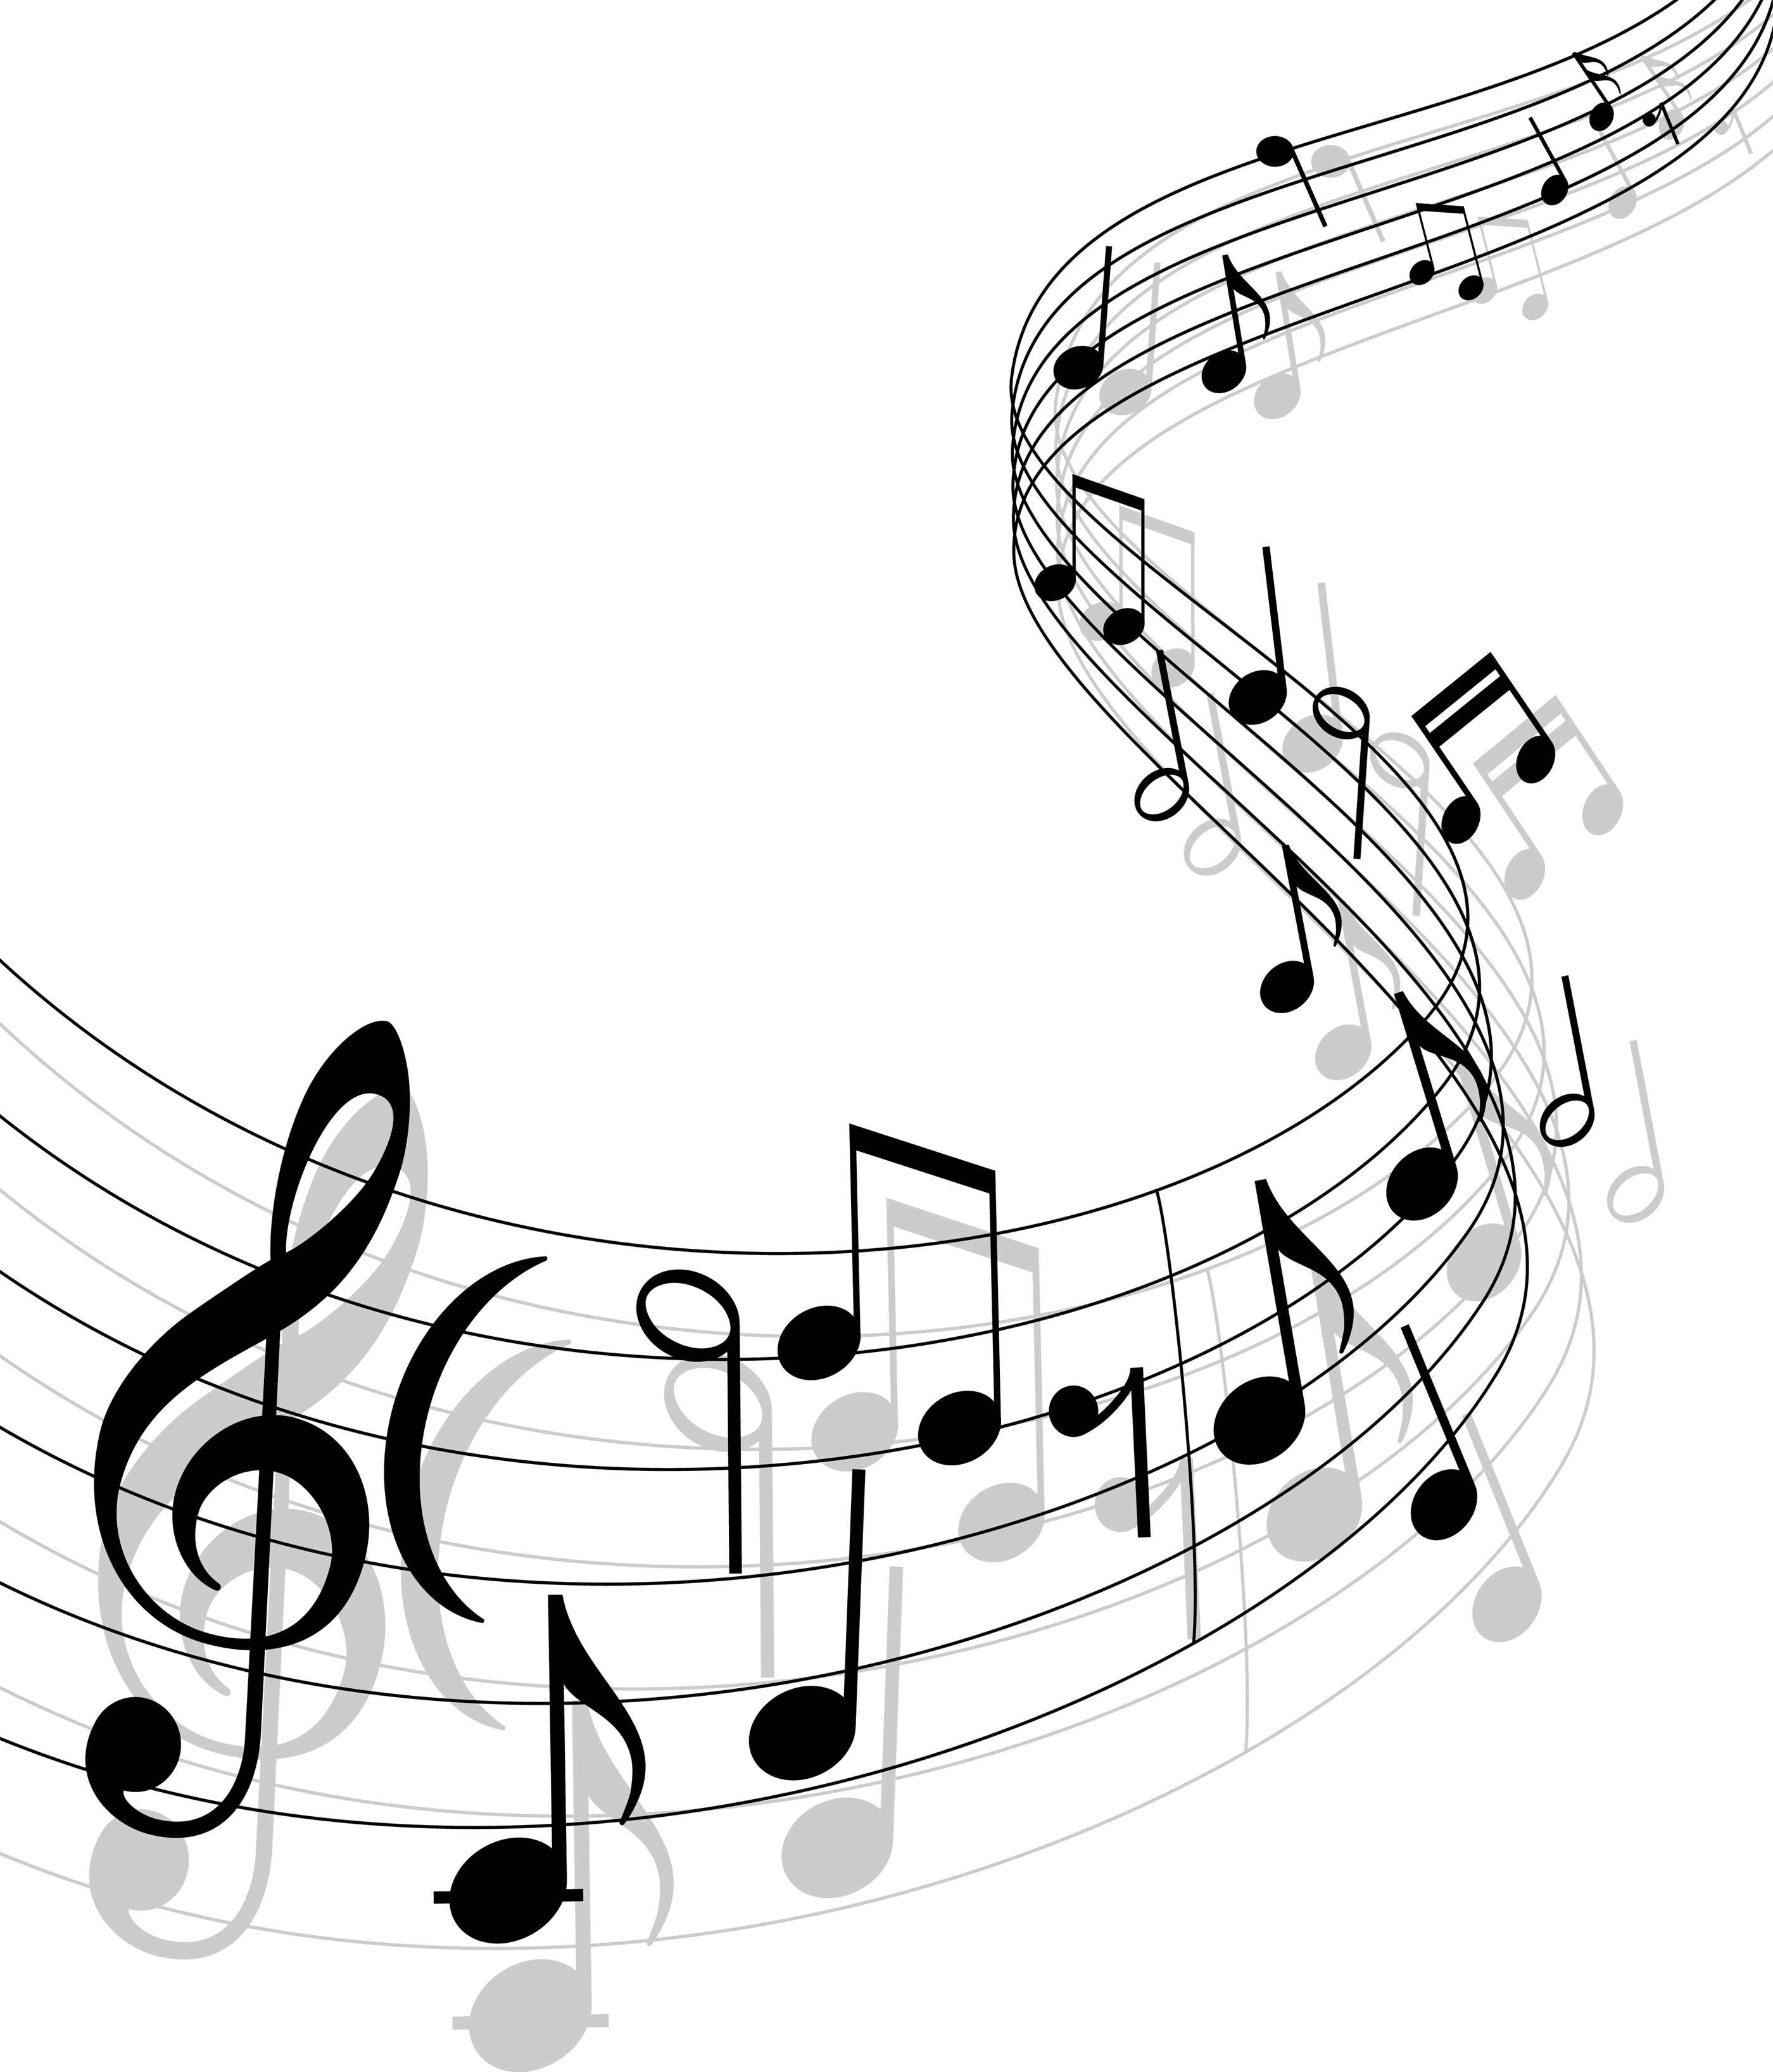 Music note musical notes music musical note clipart free